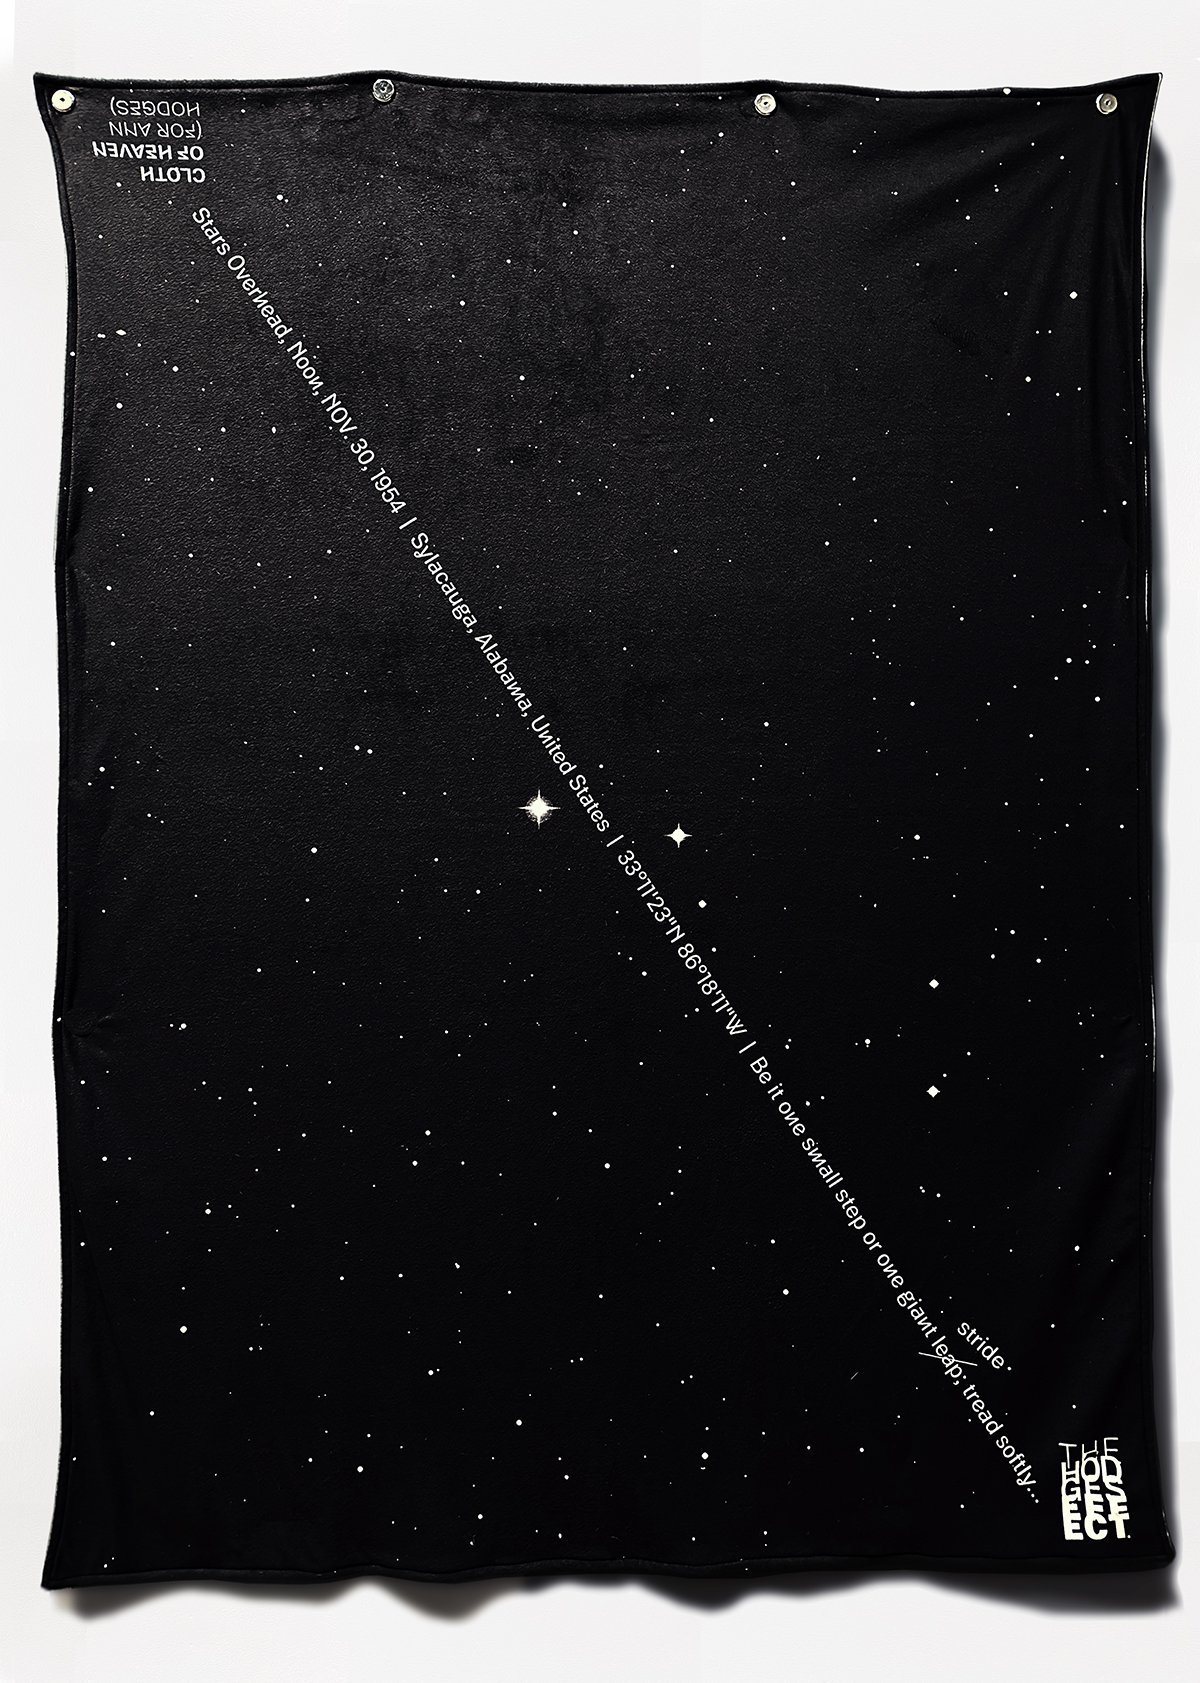 Connie Hwang and Sean Miller, CLOTH OF HEAVEN (FOR ANN HODGES) Blanket Featuring Stars Overhead, Noon, NOV. 30, 1954, 2023.